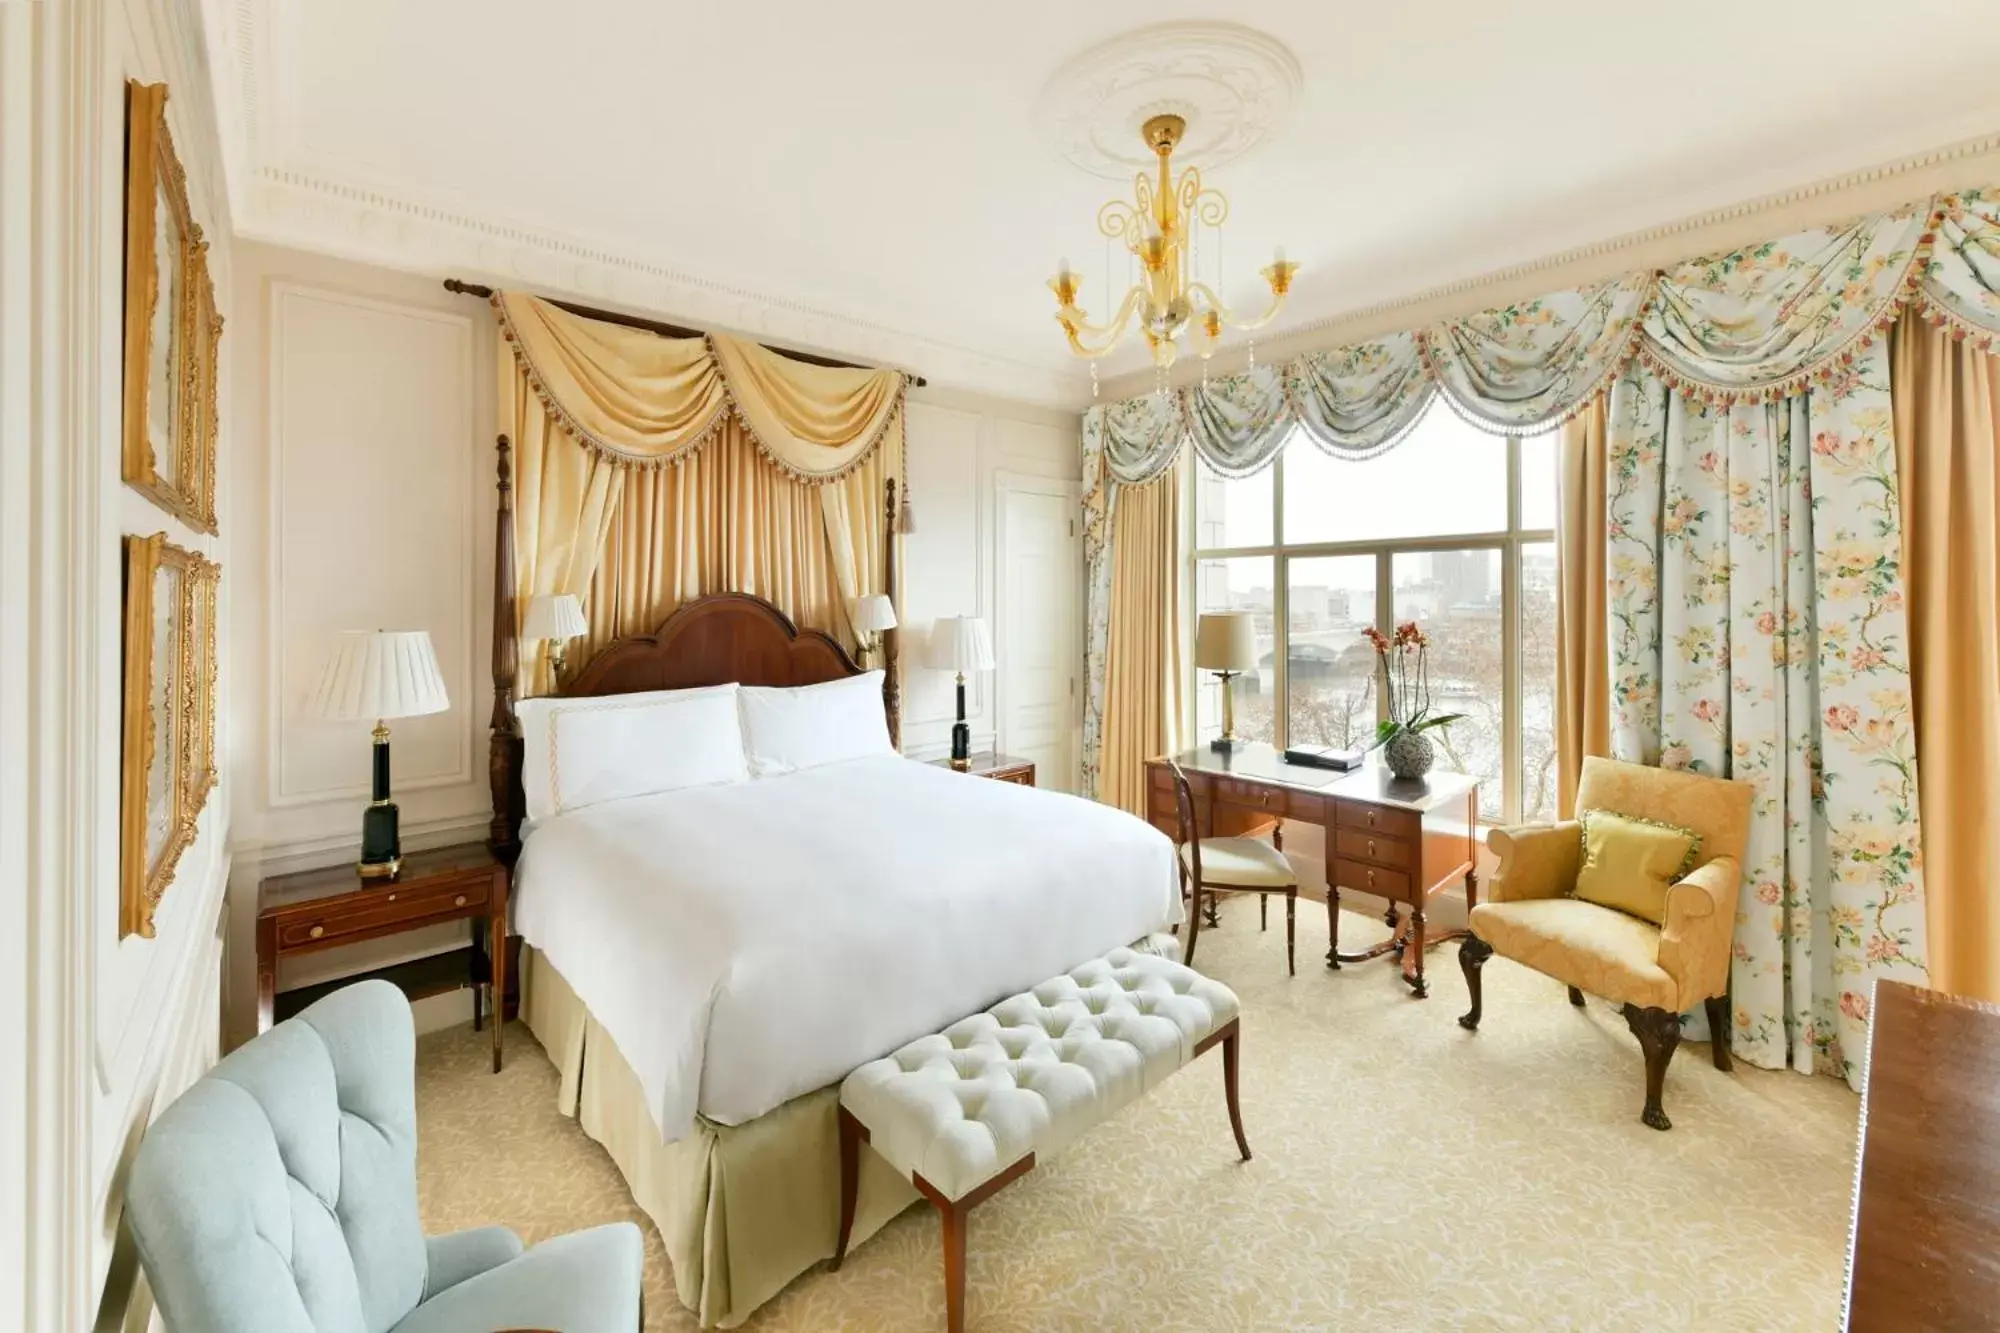 Junior King Suite with River View in The Savoy